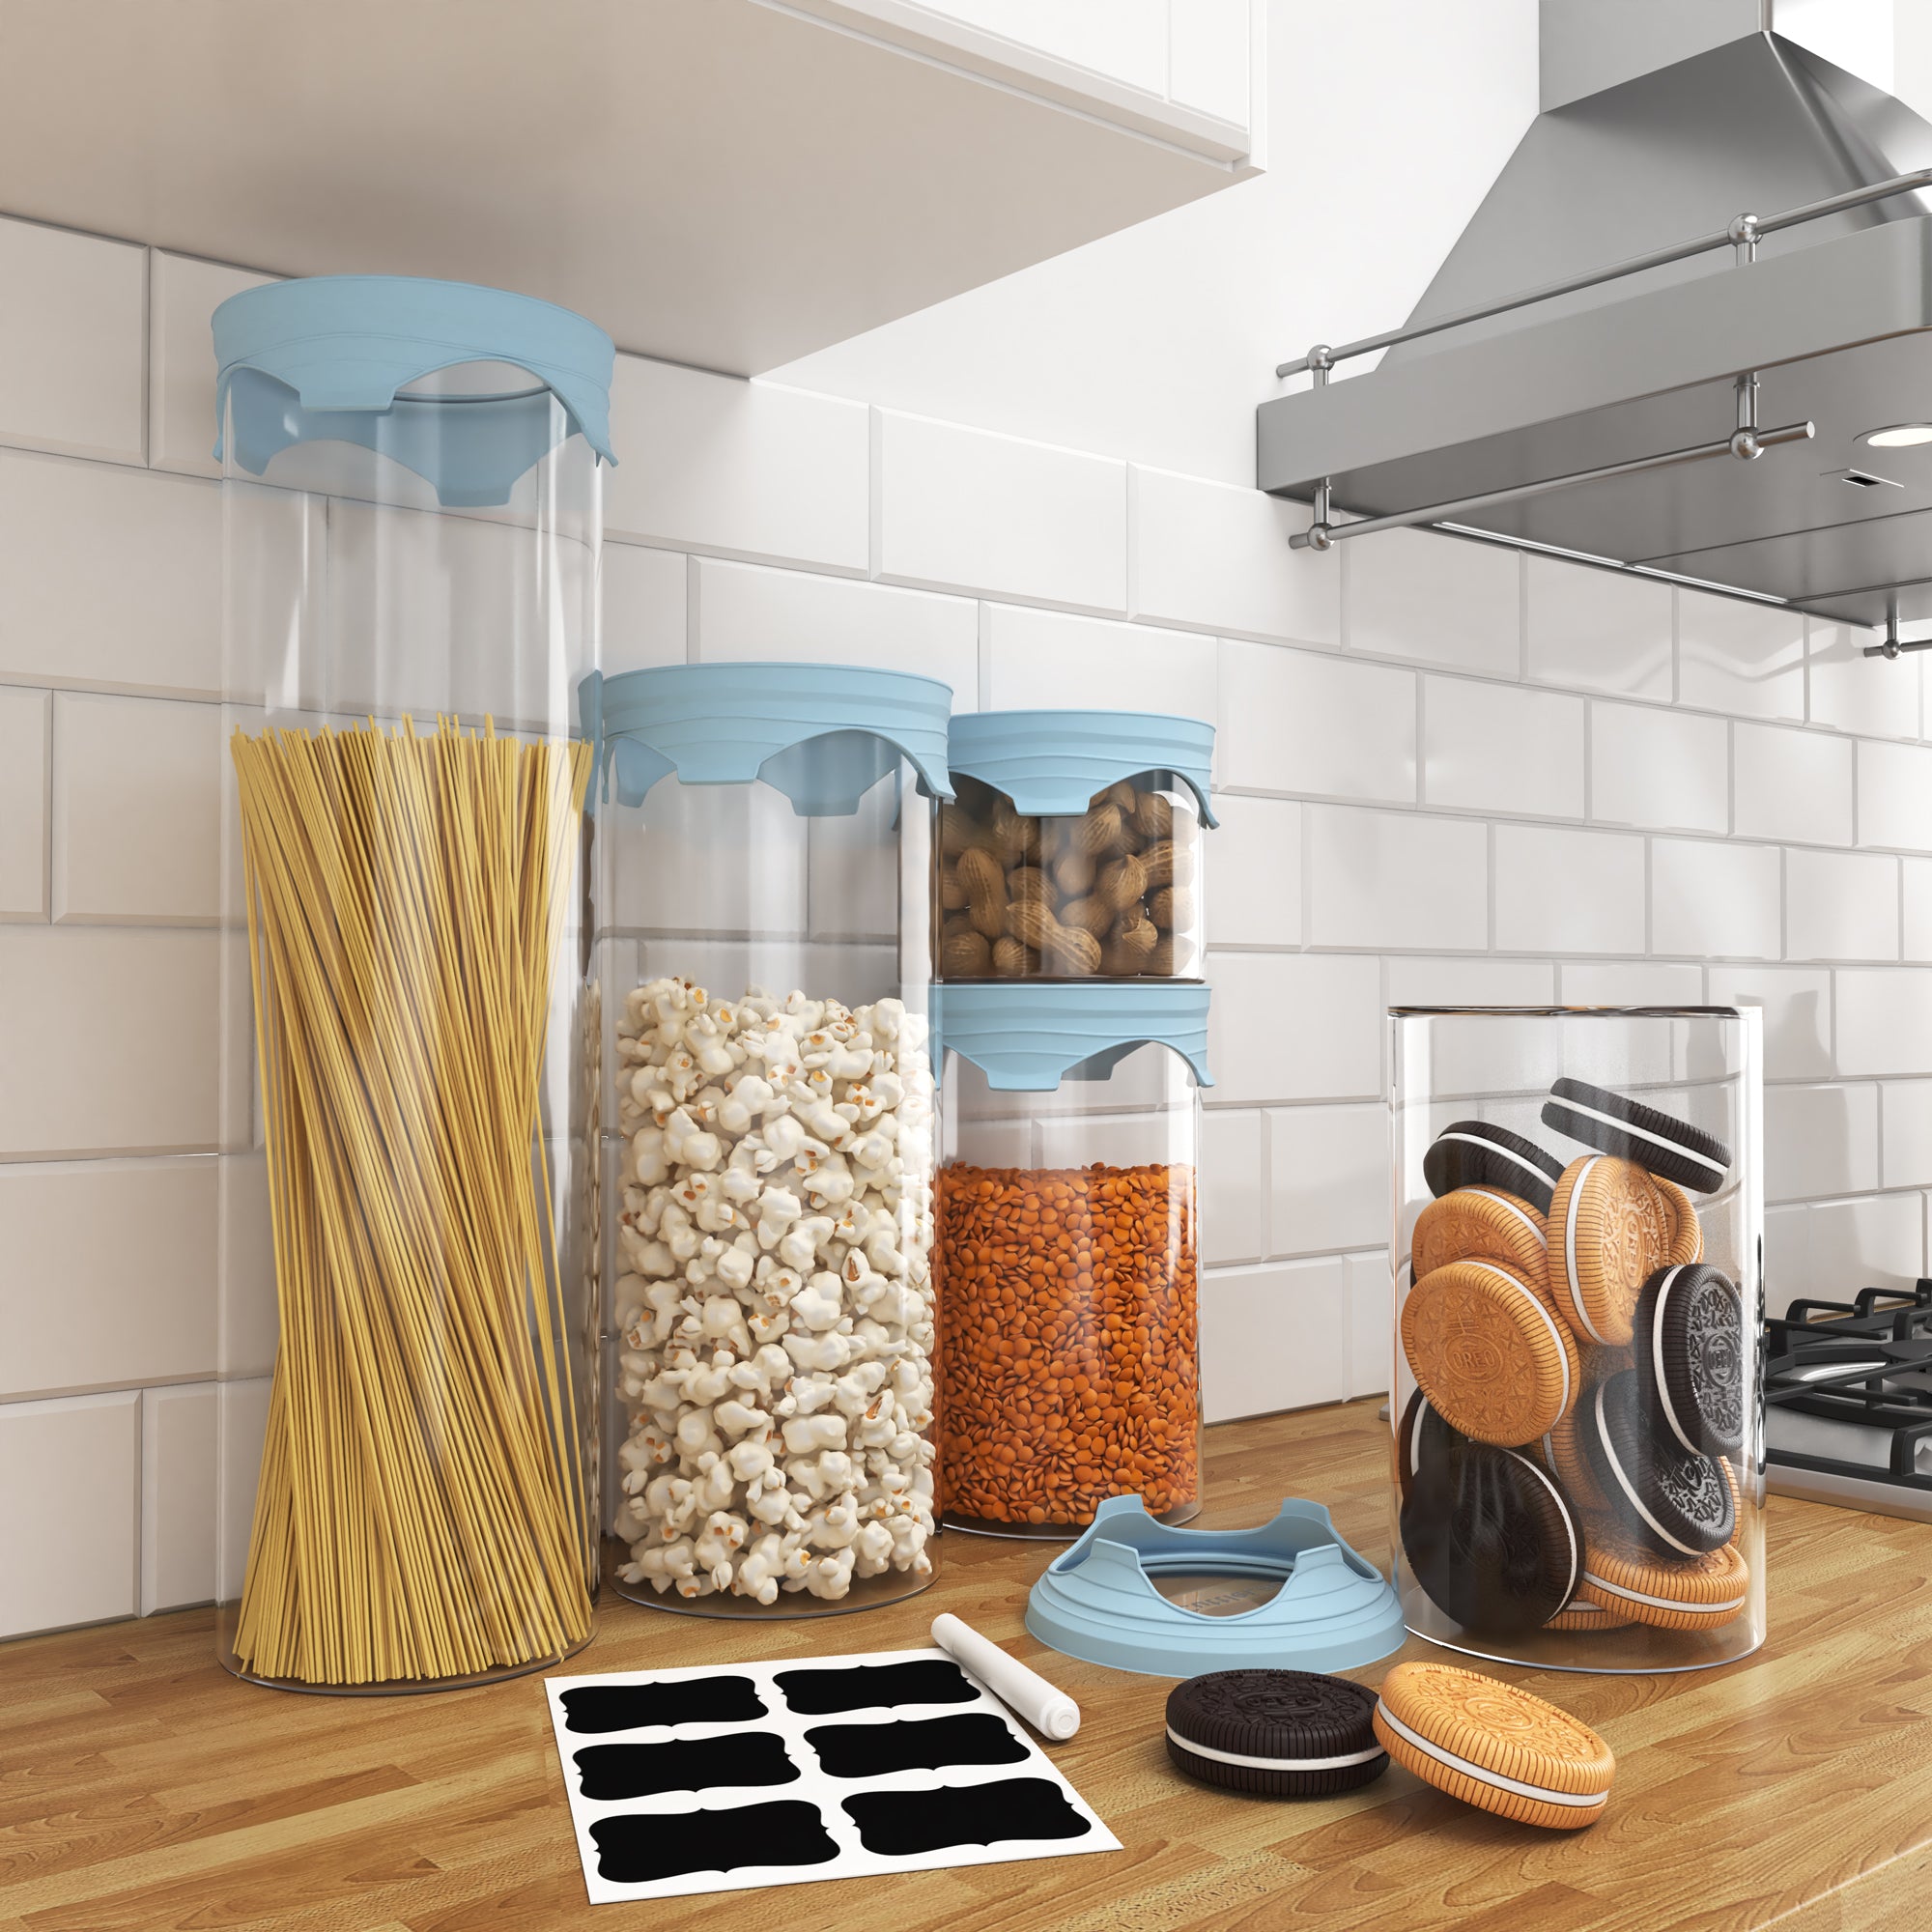 5-Piece Airtight Glass Storage Canisters in Sky – CuttleLab